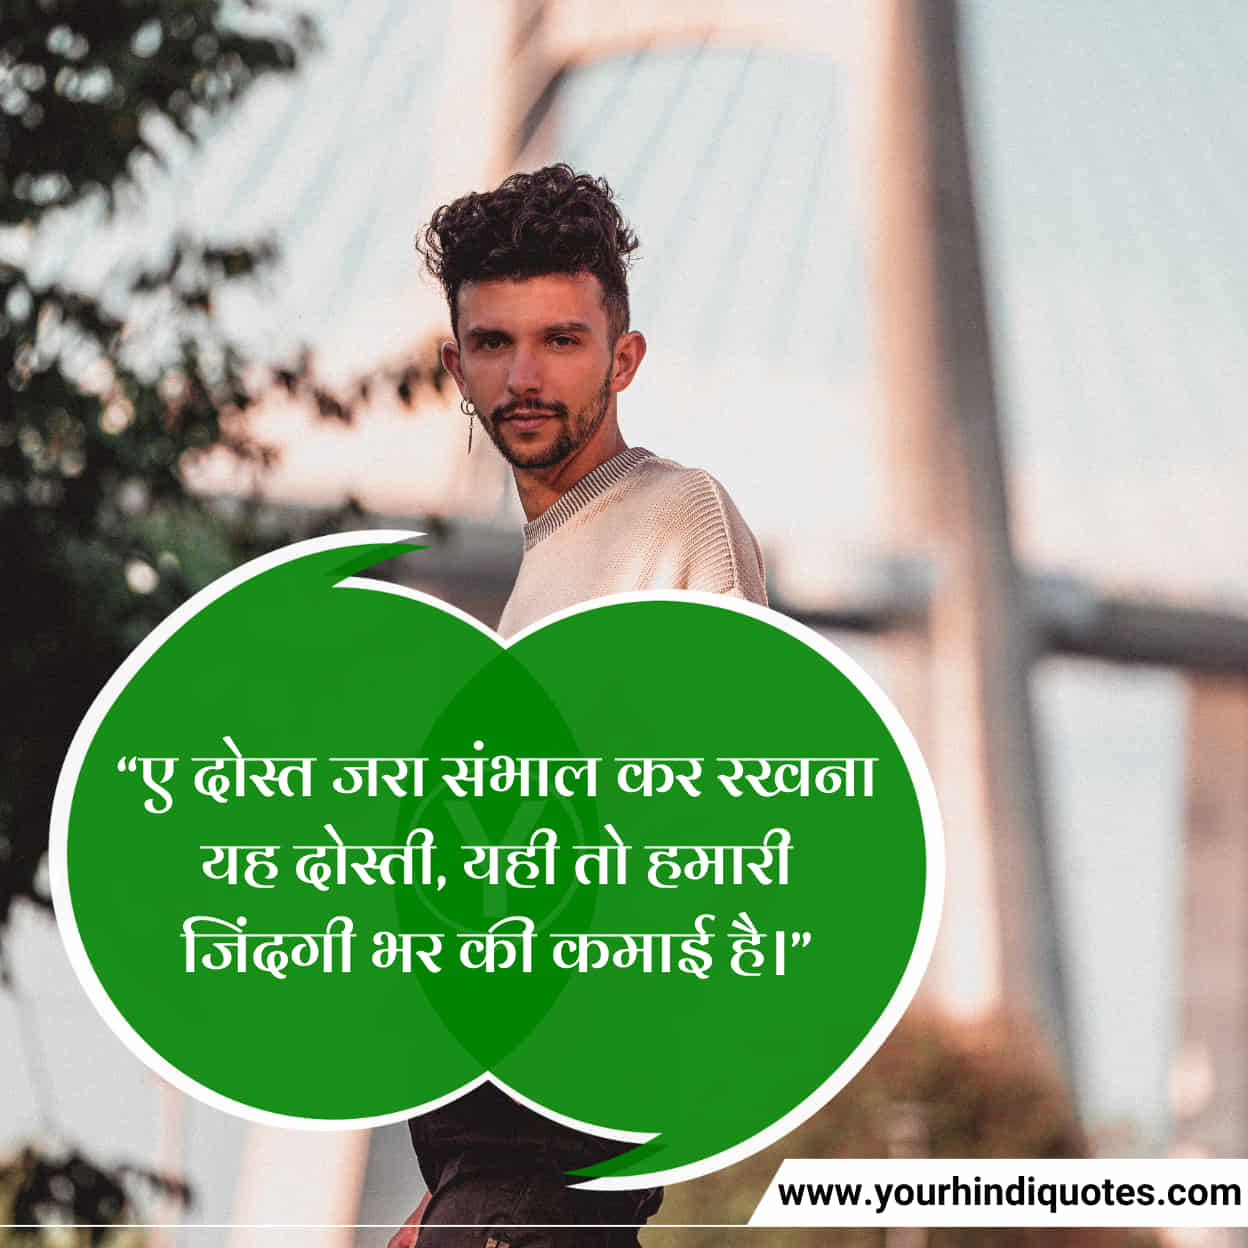 Hindi Quotes For Friendship Day